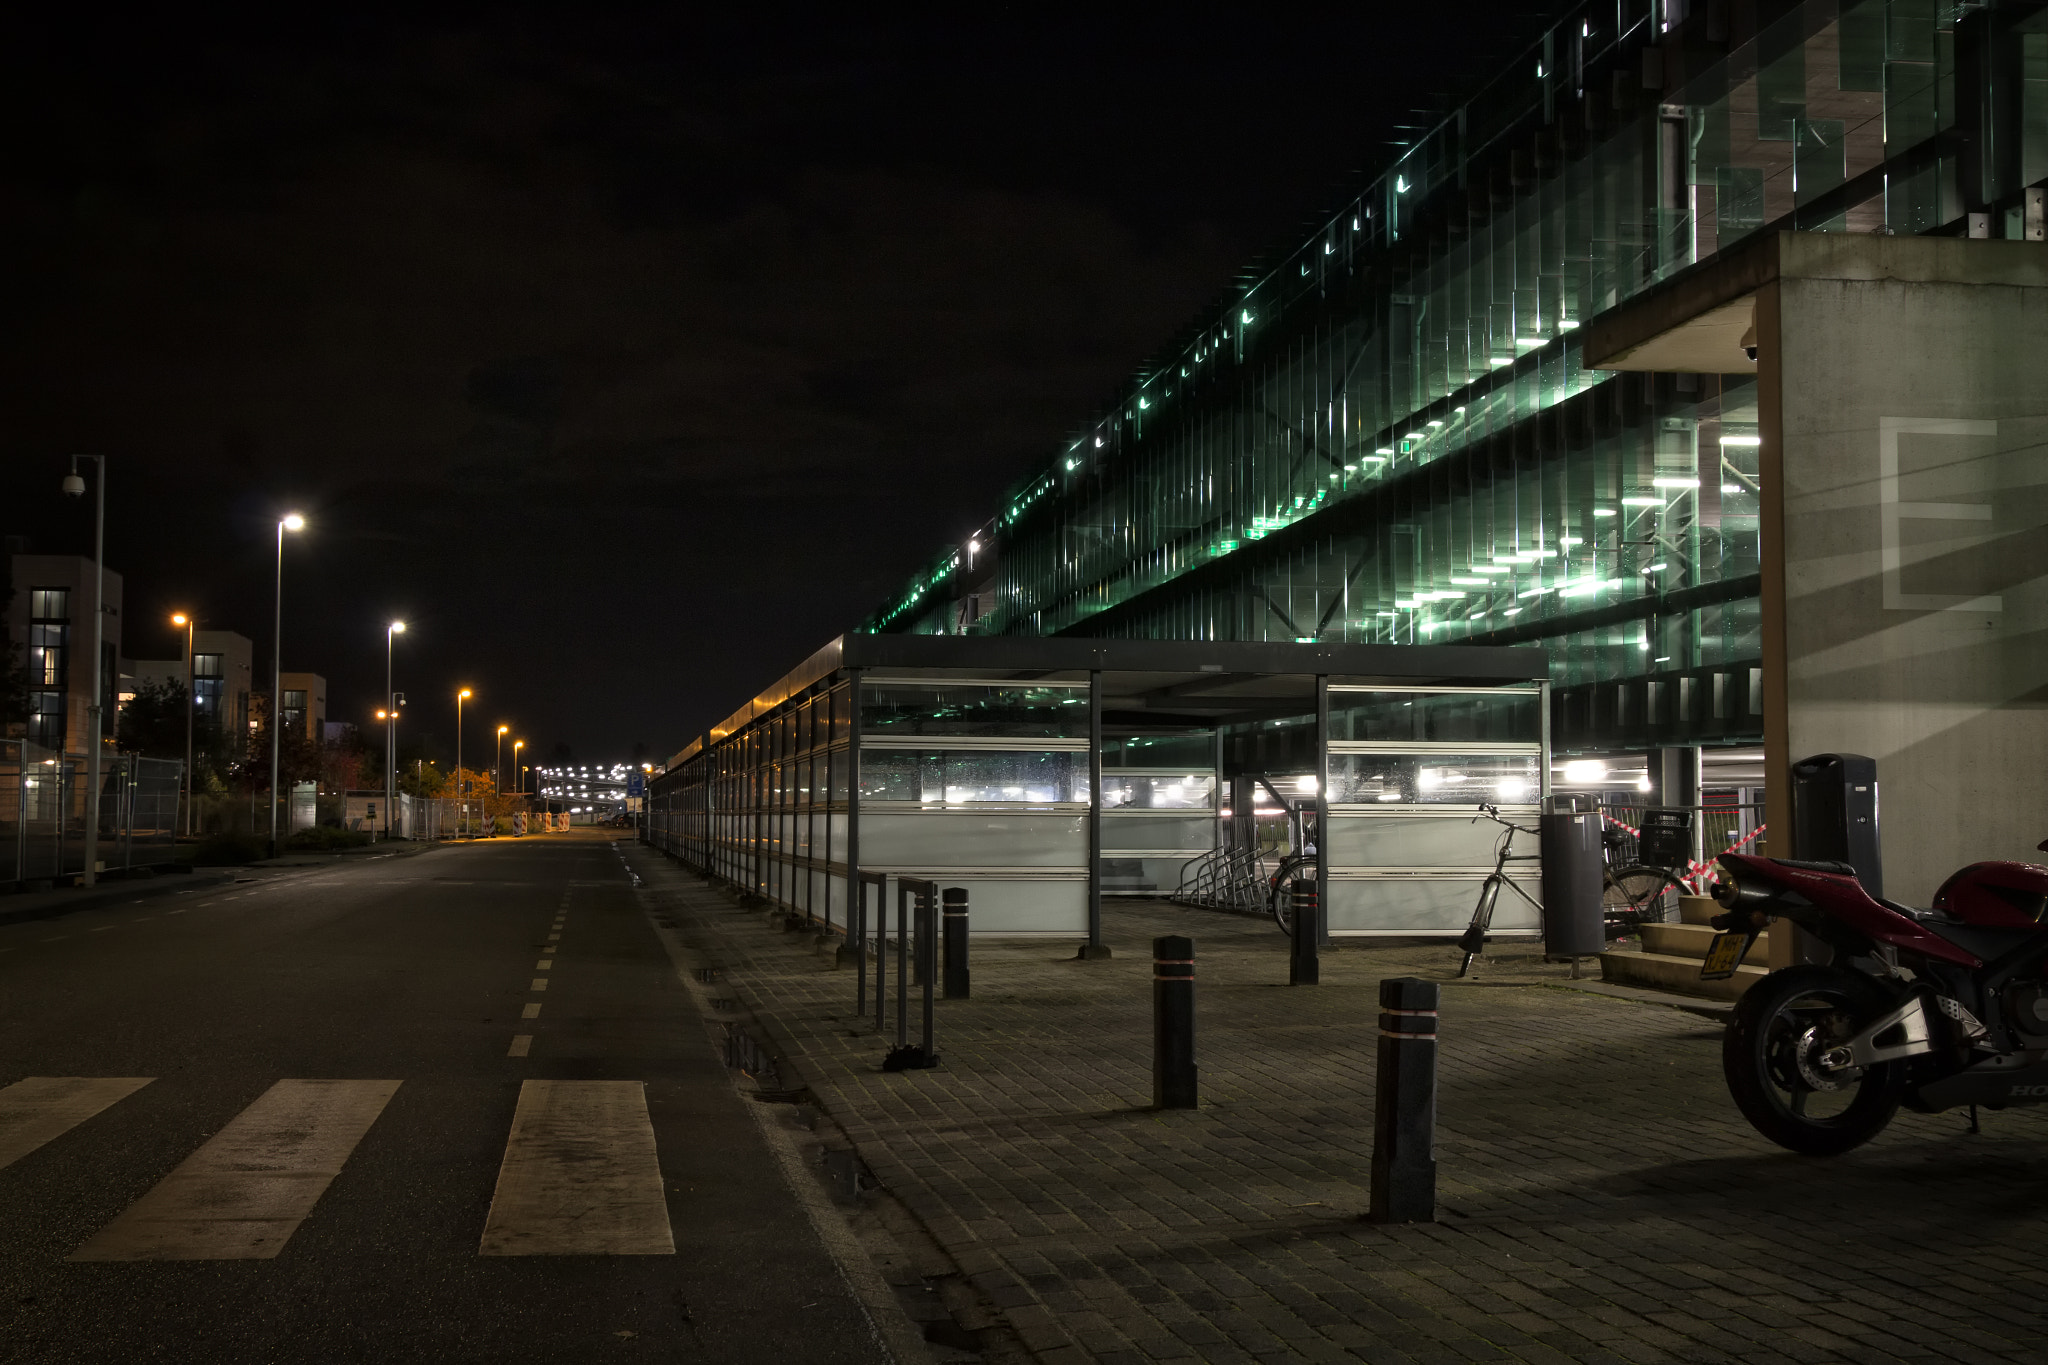 Canon EOS 70D + Sigma 24-105mm f/4 DG OS HSM | A sample photo. Streetview asml eindhoven photography